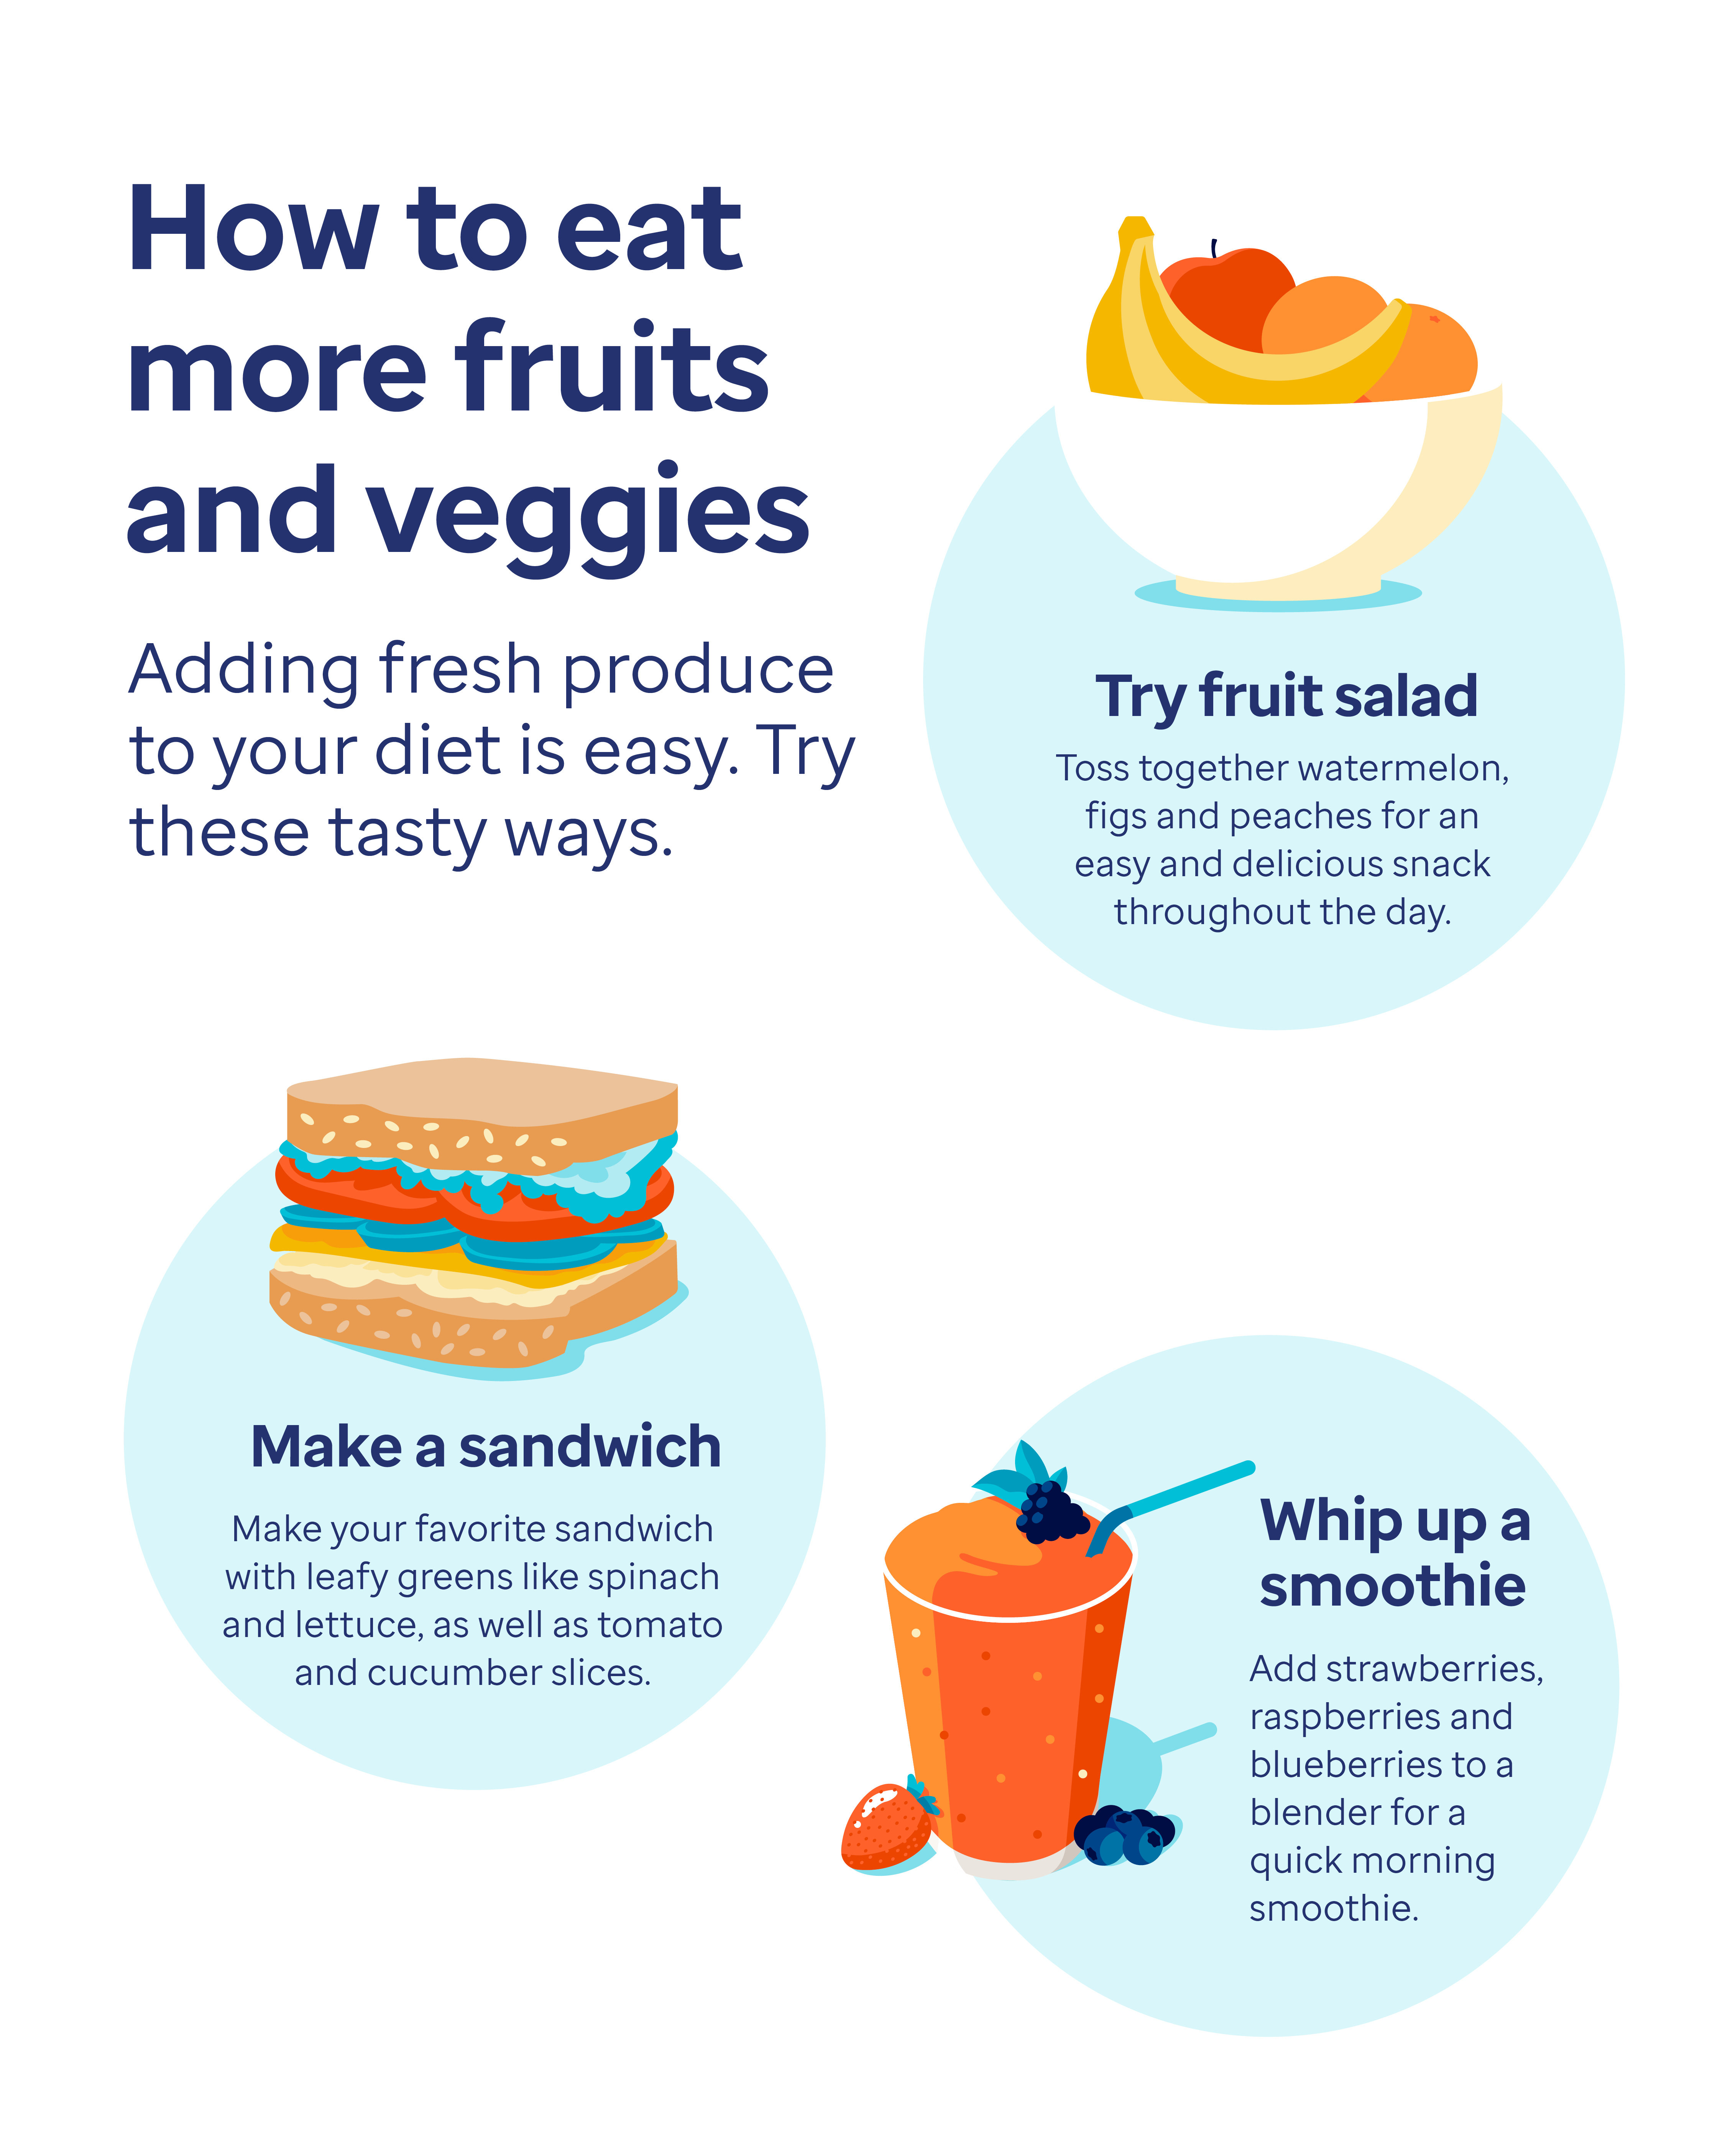 How to eat more fruit and veggies